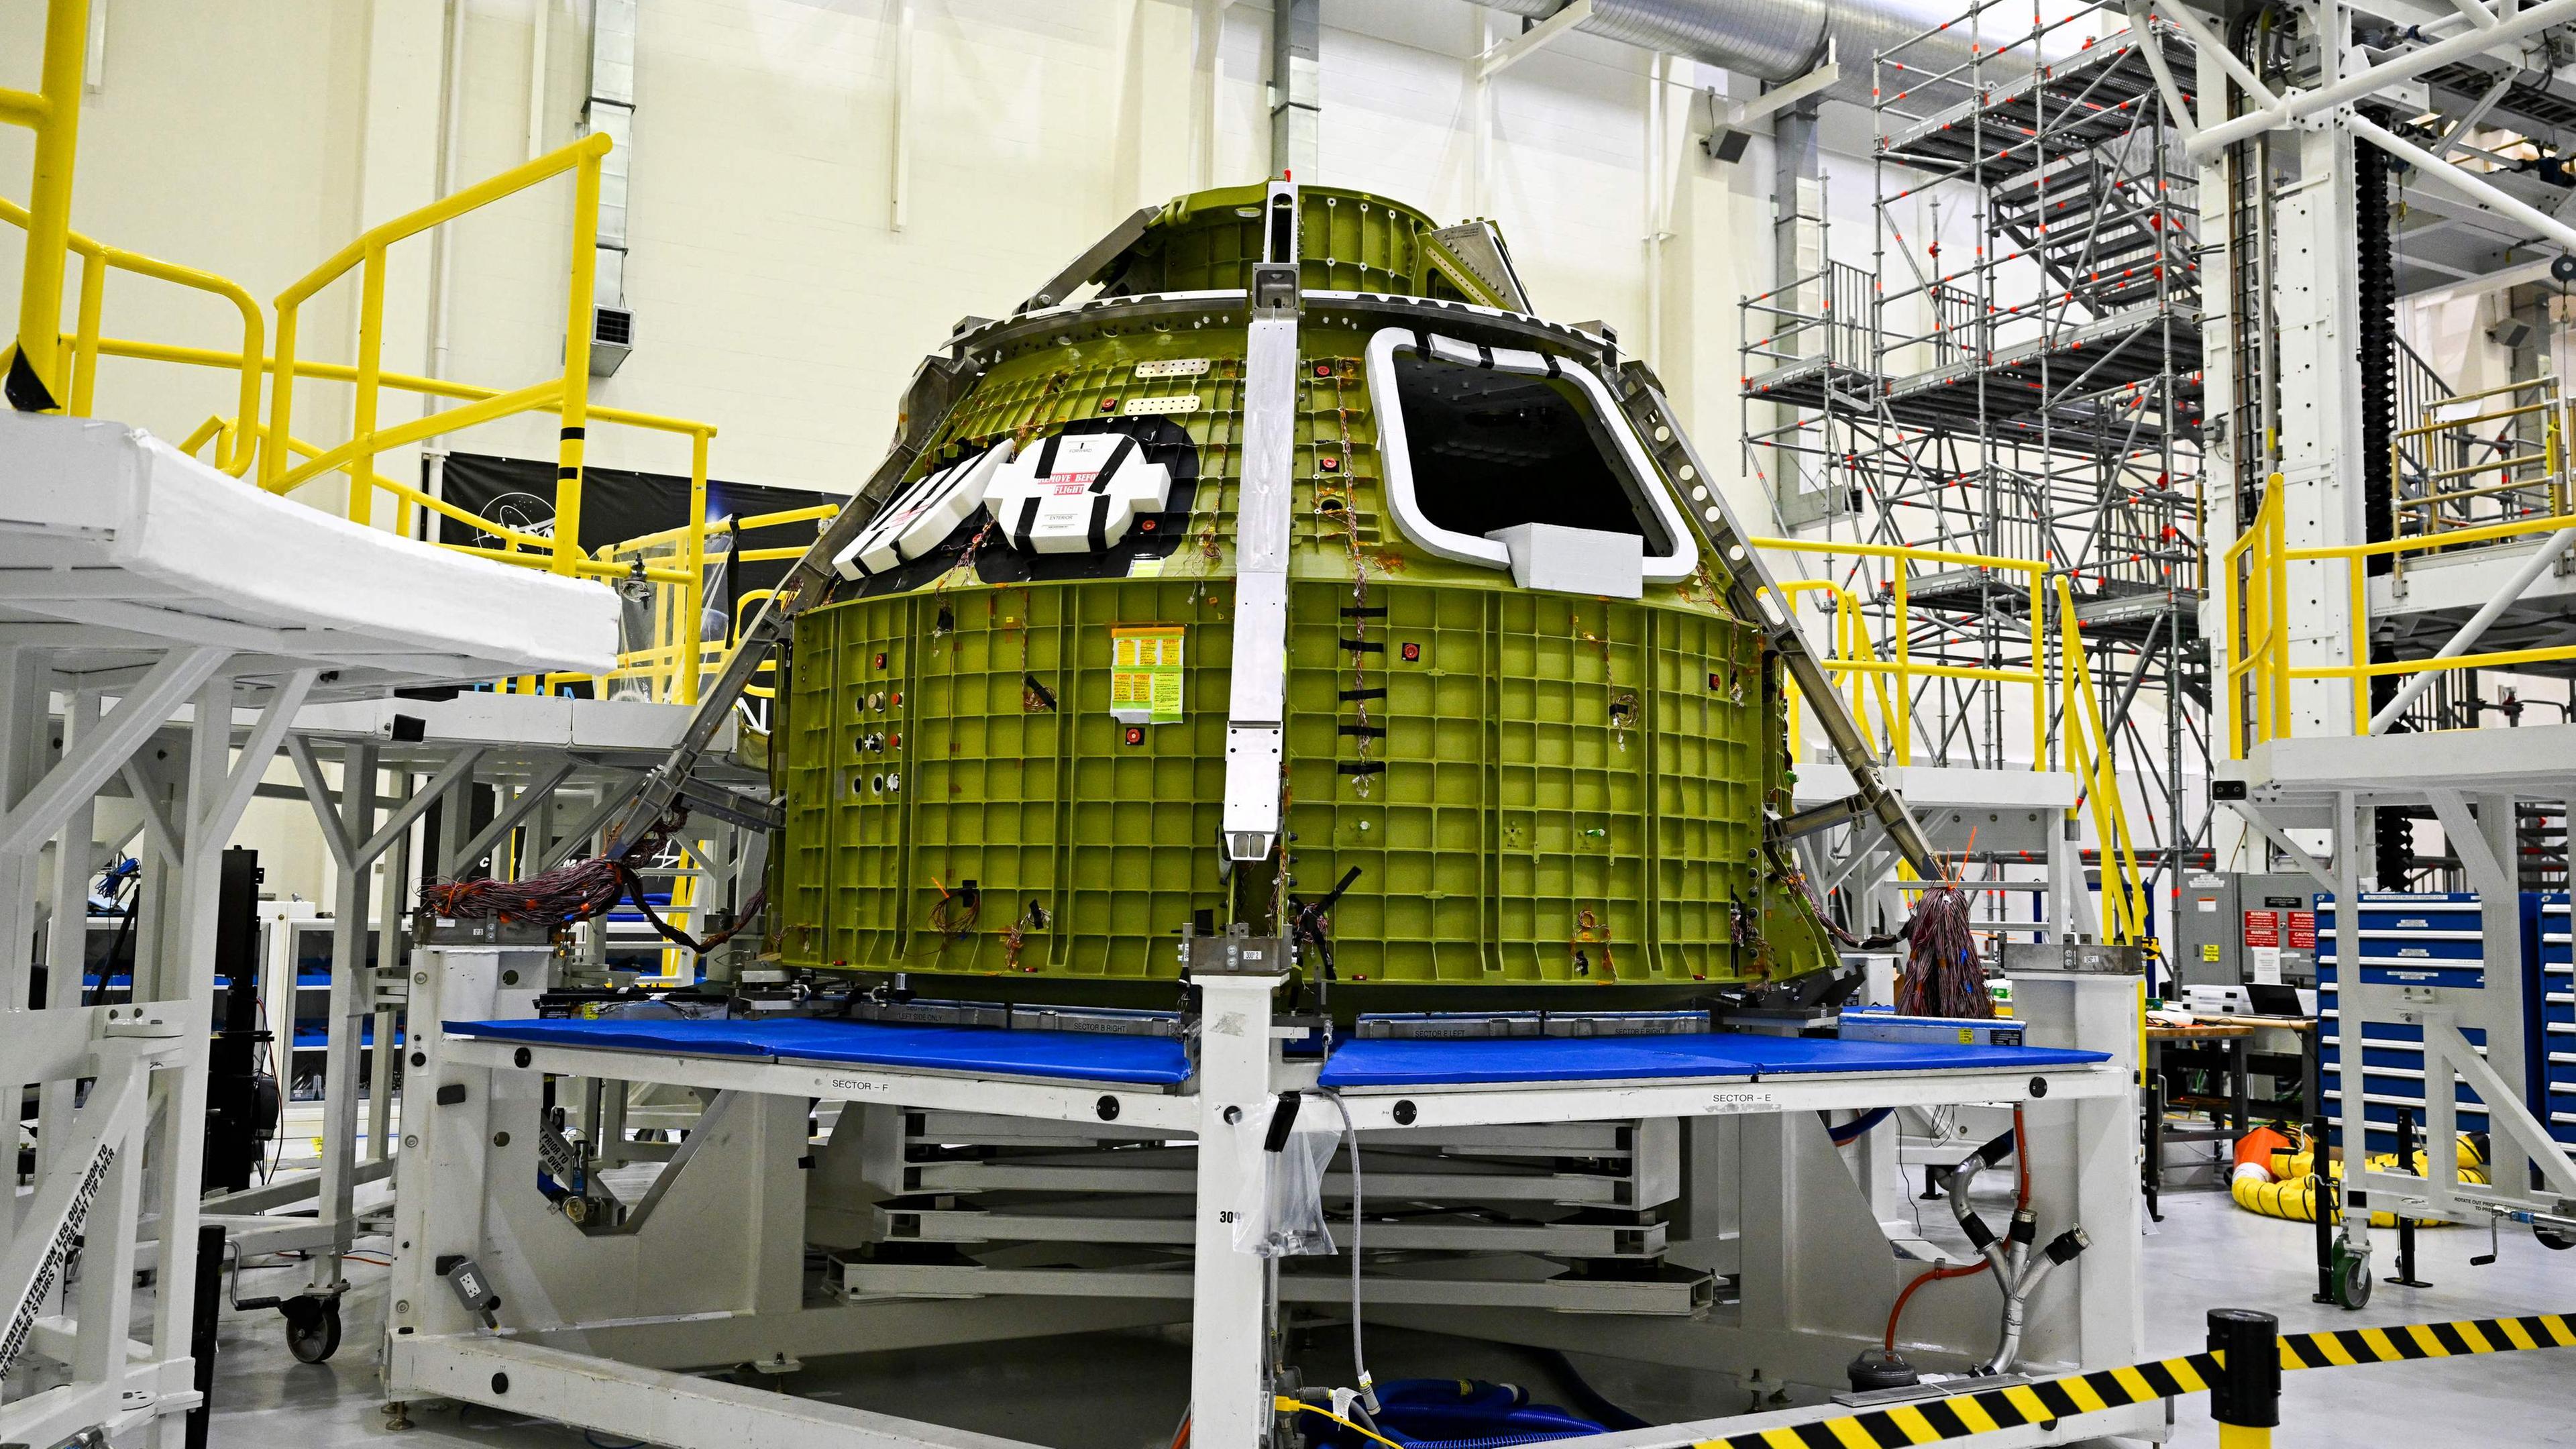 Das Besatzungsmodul Artemis III ist am 8. August 2023 im Neil Armstrong Operations and Checkout Building im Kennedy Space Center in Cape Canaveral, Florida